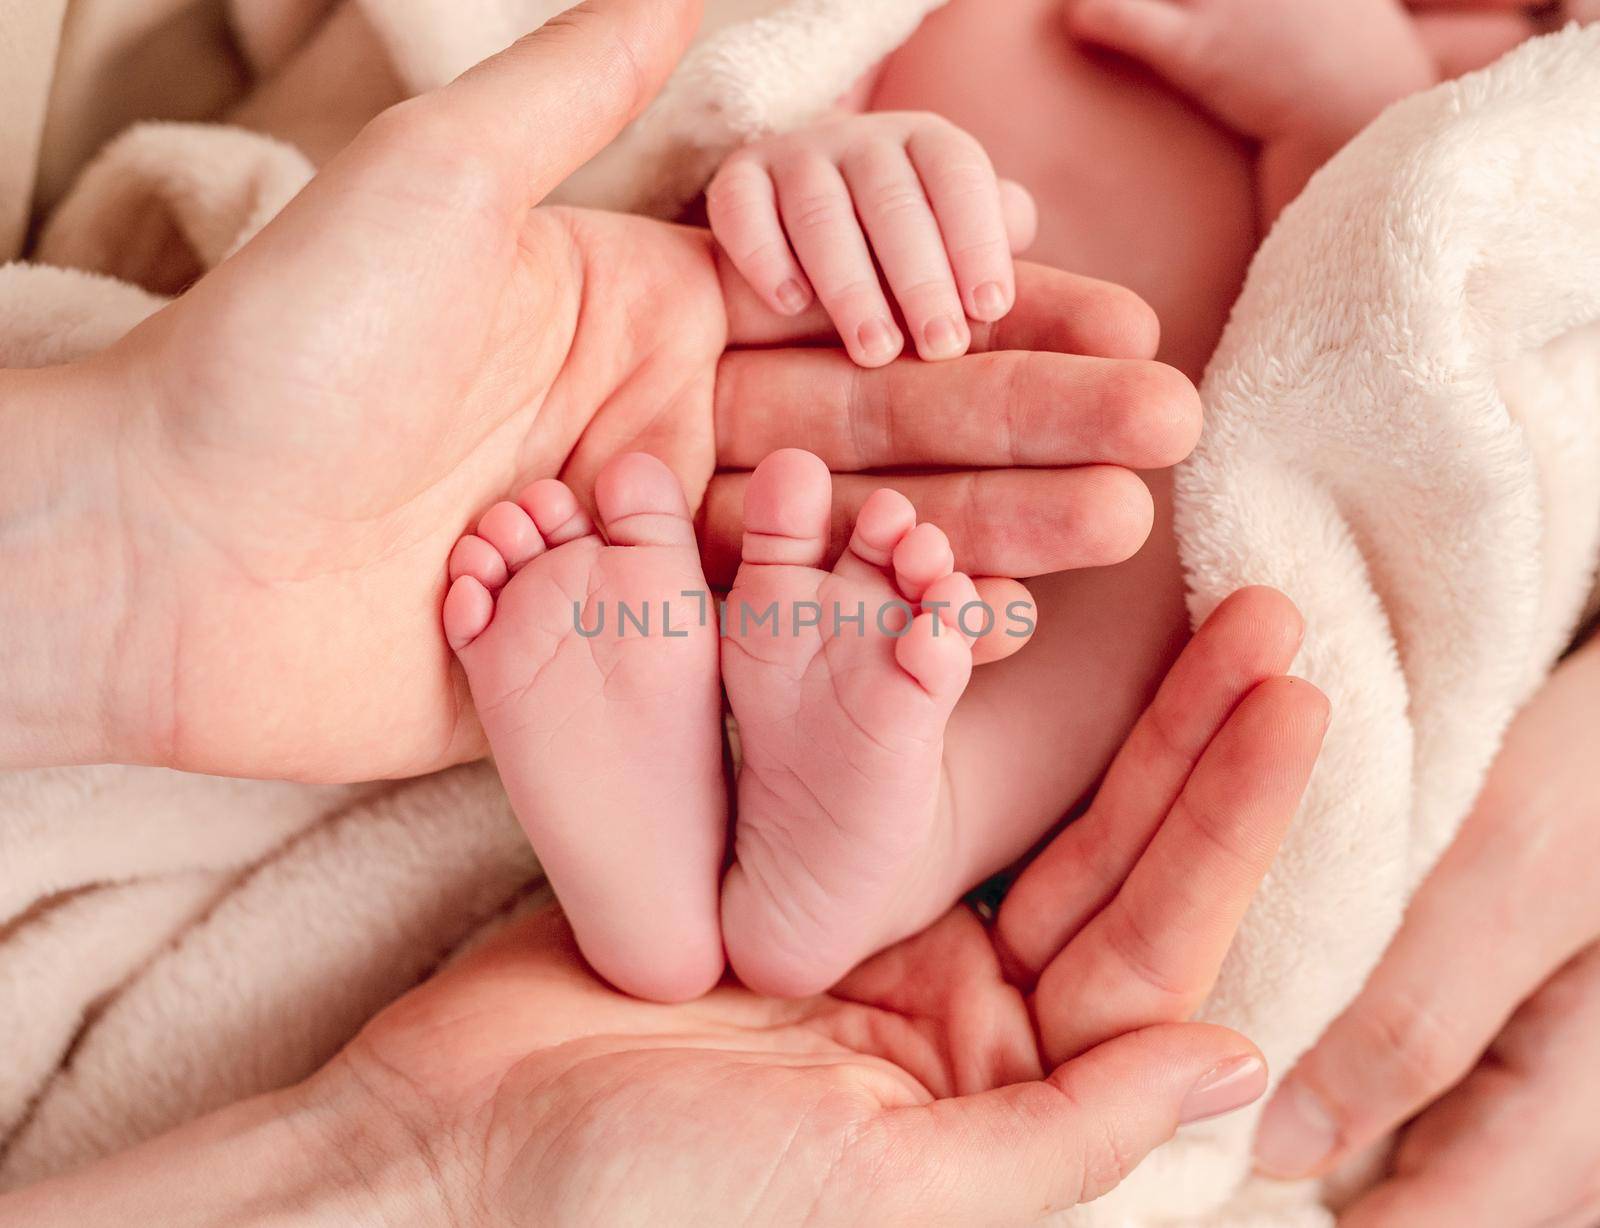 Bare feet of newborn baby surrounded by family members hands